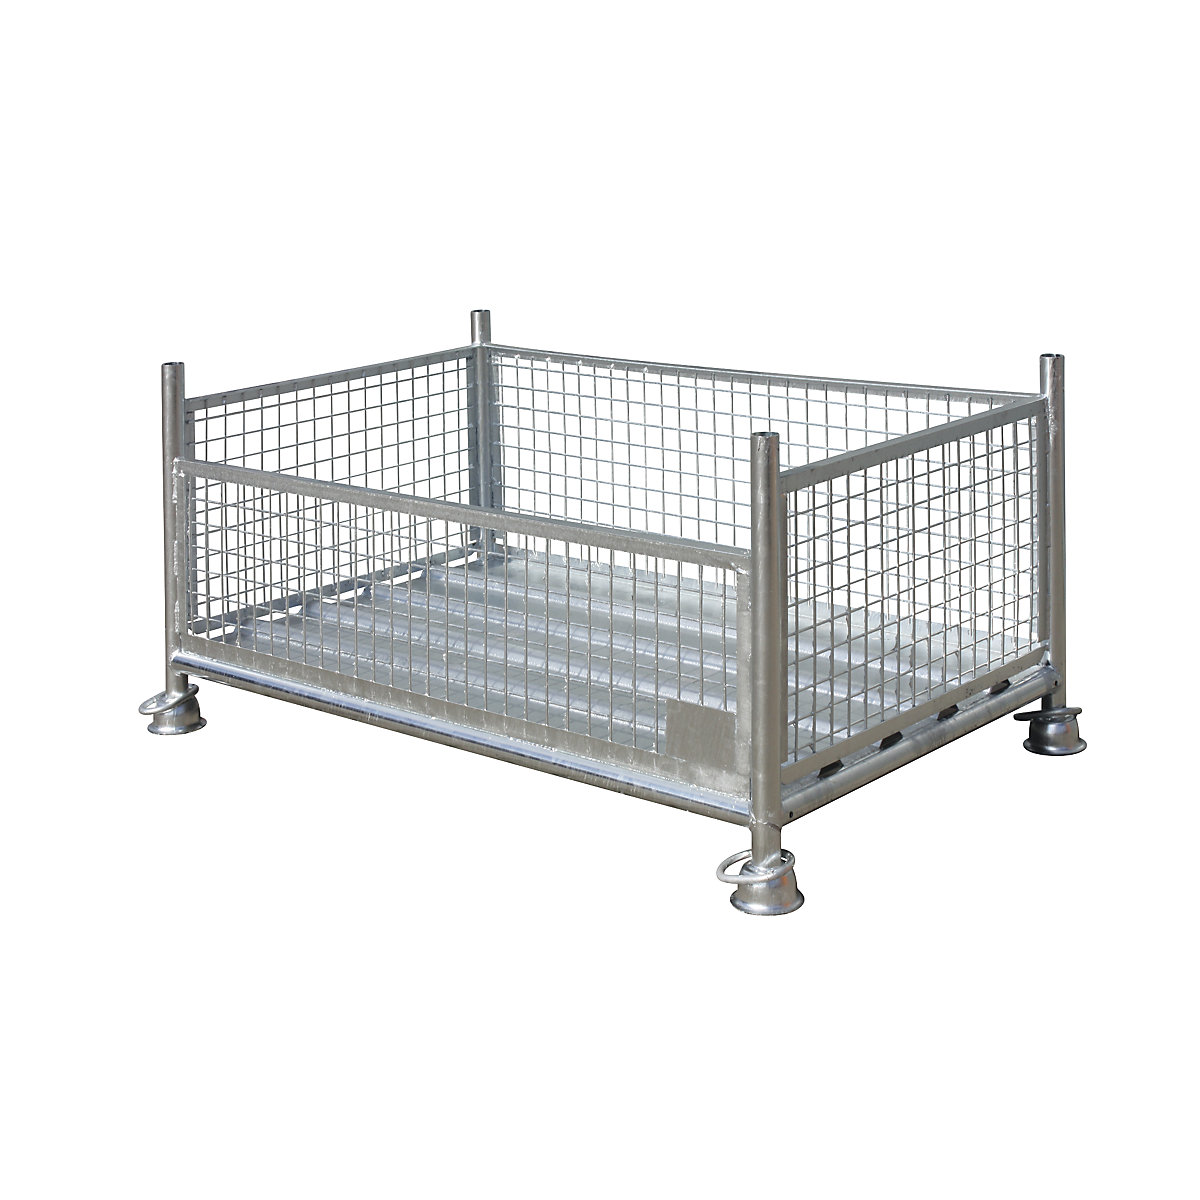 Mesh pallet stacking frame – Eichinger, LxWxH 1200 x 1030 x 750 mm, zinc plated-2